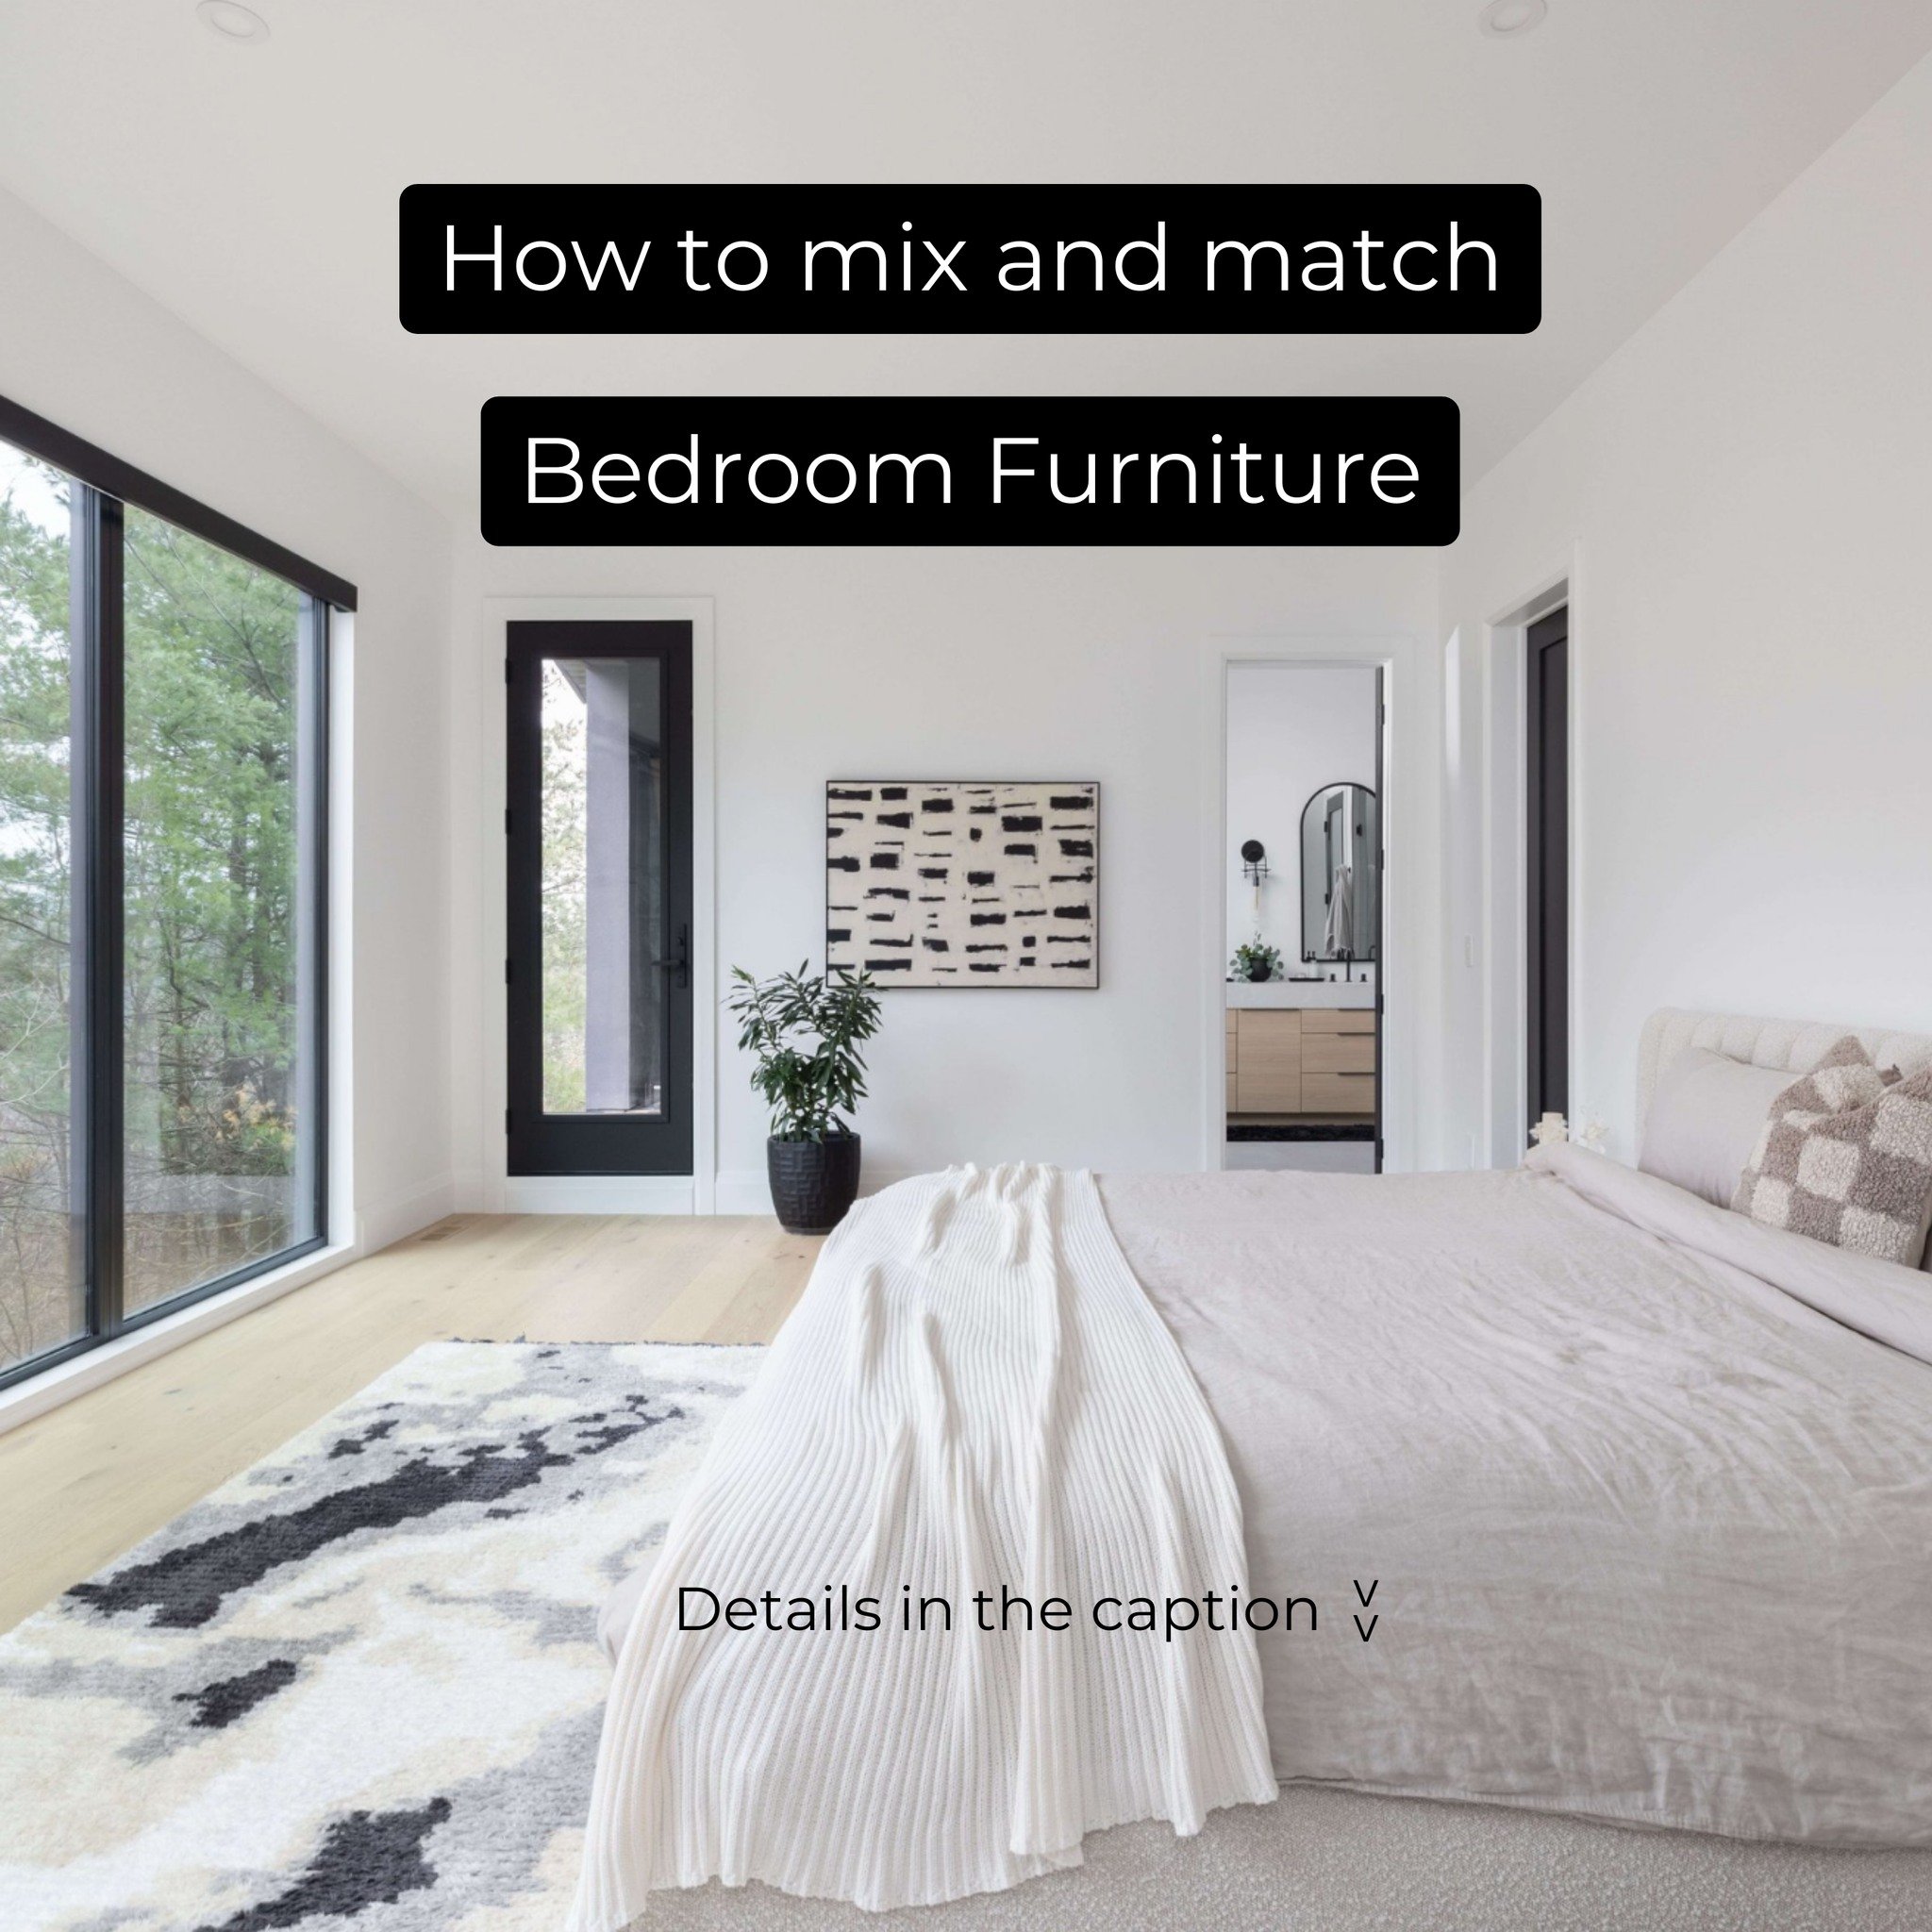 How to Mix and Match Bedroom Furniture Like a Pro

1. Make your bed the focal point that stands out from everything else.
2. Pay attention to scale. Ensure pieces don&rsquo;t appear disproportionate.
3. Mix shapes and styles.
4. Bring the whole space